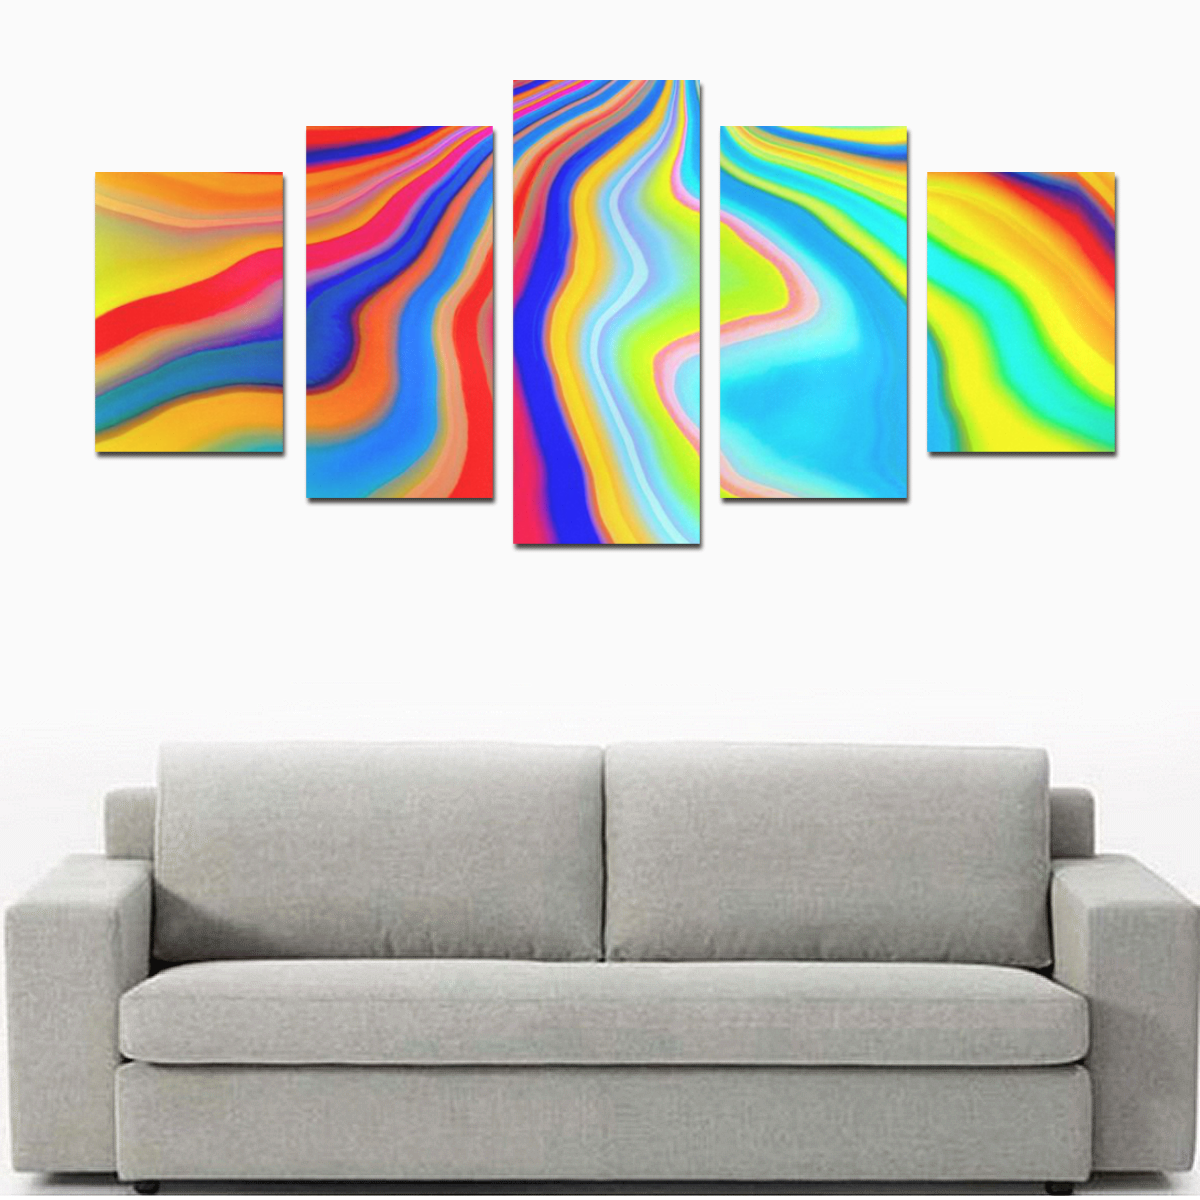 alive 3 (abstract) by JamColors Canvas Print Sets D (No Frame)